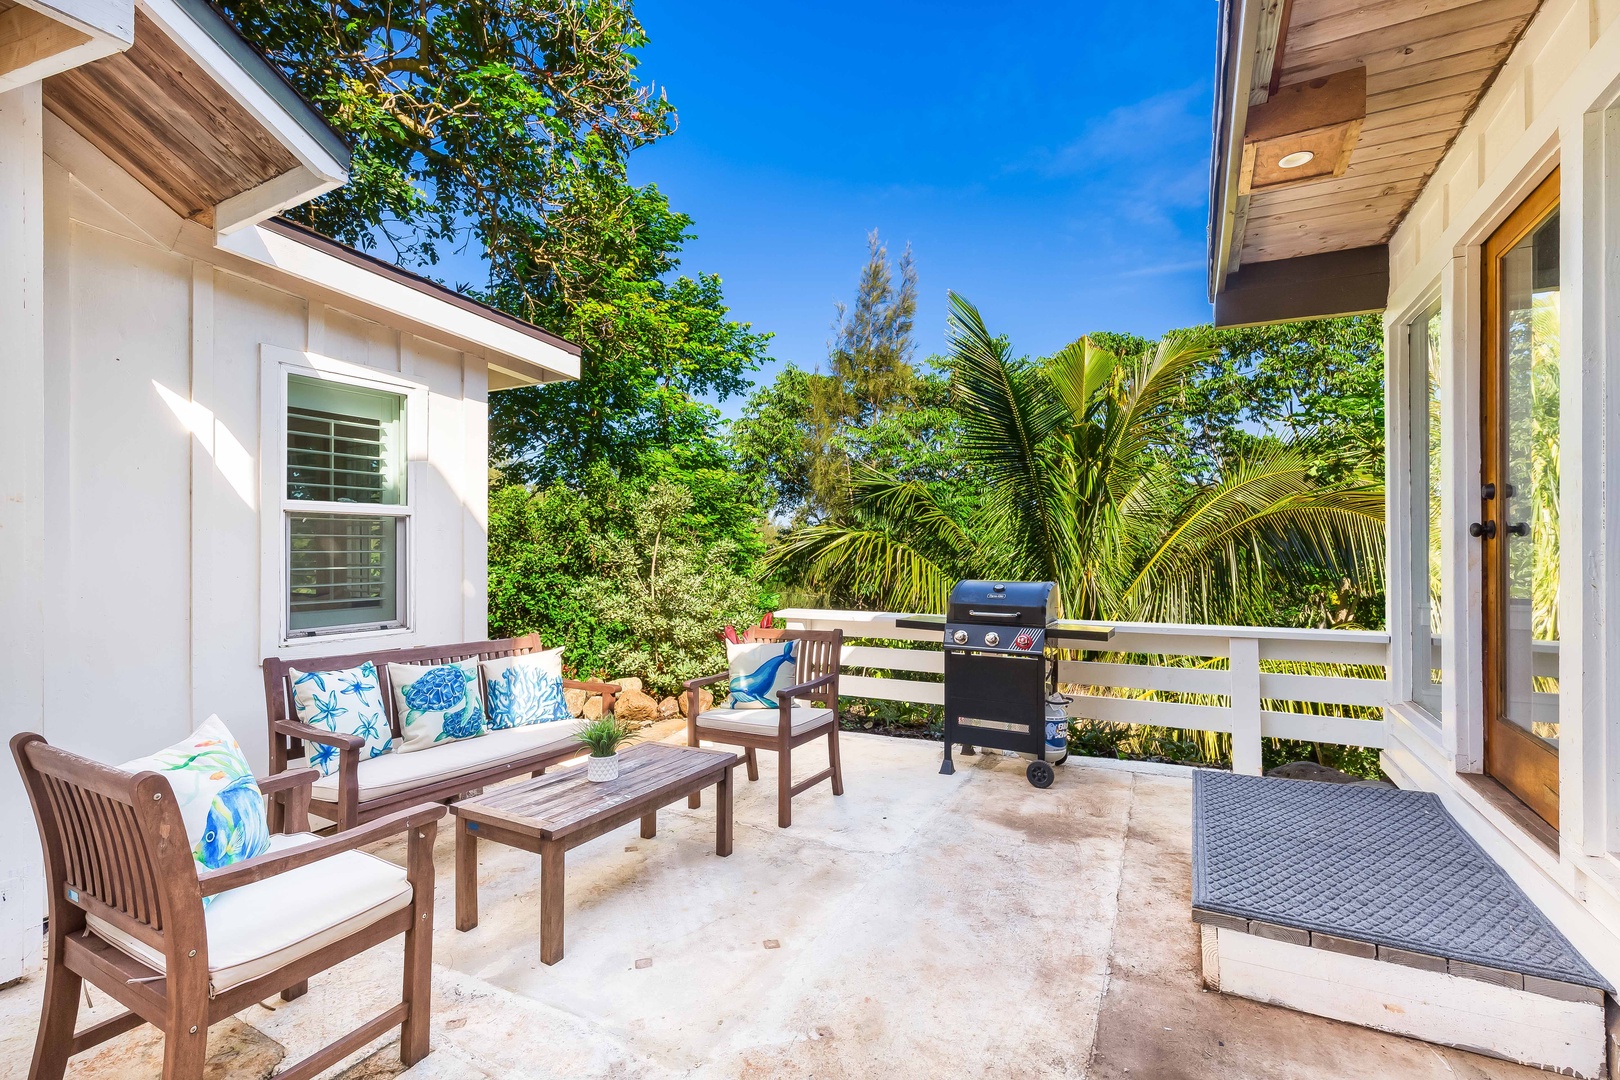 Haleiwa Vacation Rentals, Mele Makana - Gather on the lanai for a barbecue and drinks and enjoy the view